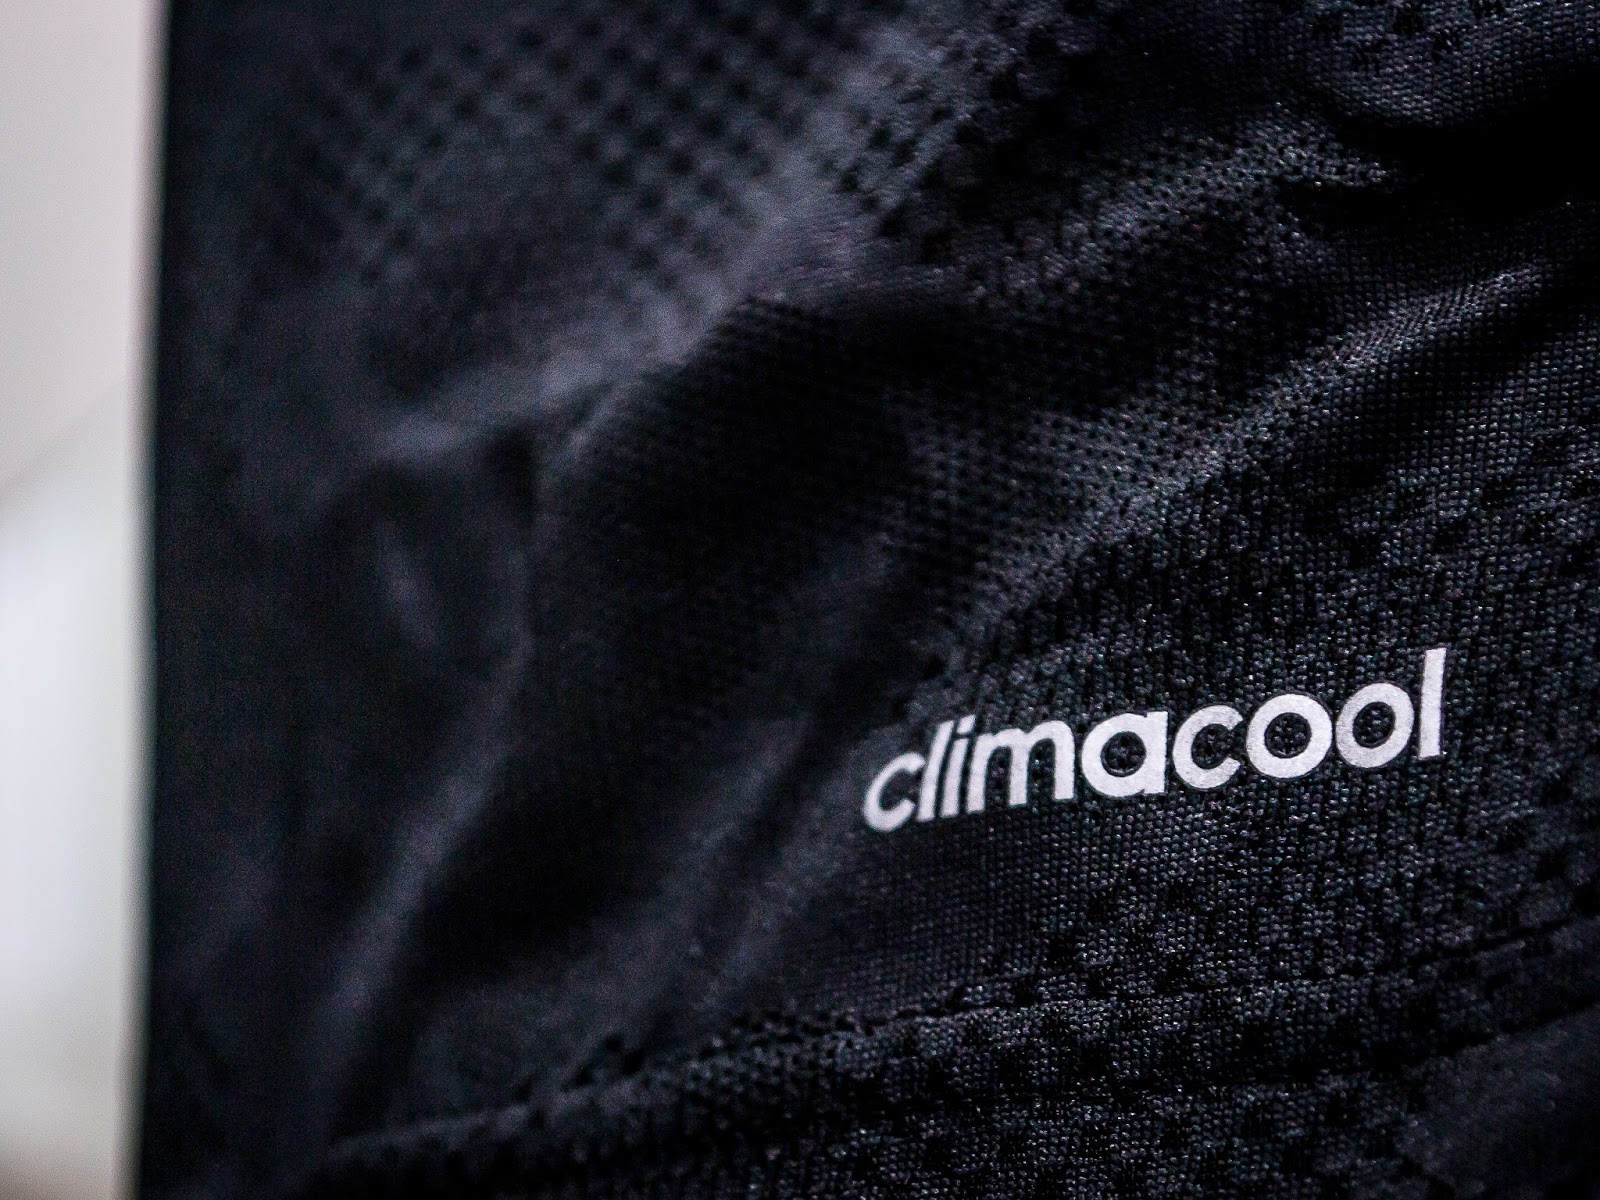 Buy > climacool climalite > in stock